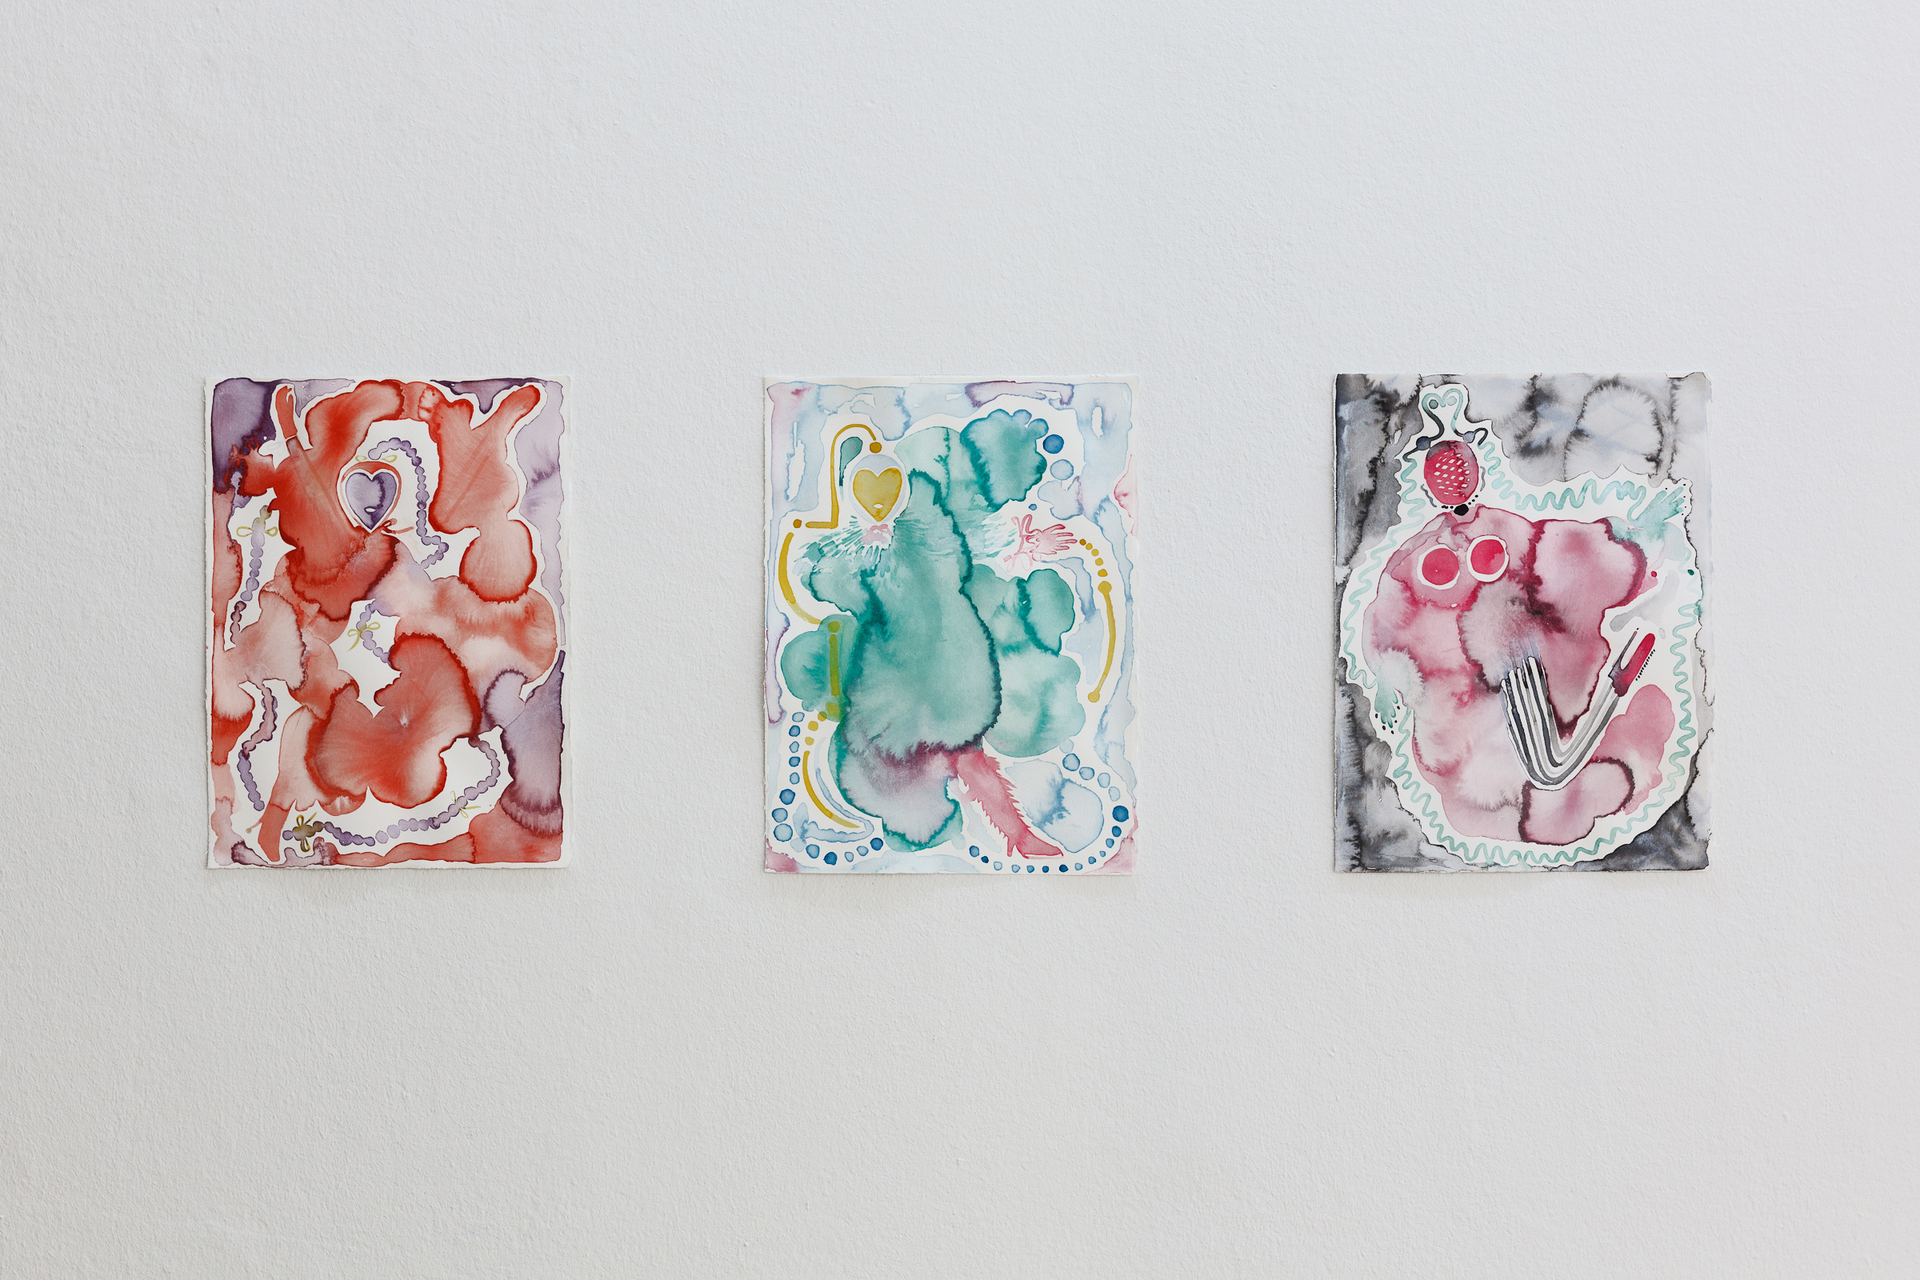 Susie Green 'Susie's Party', 2021, selected watercolours on paper